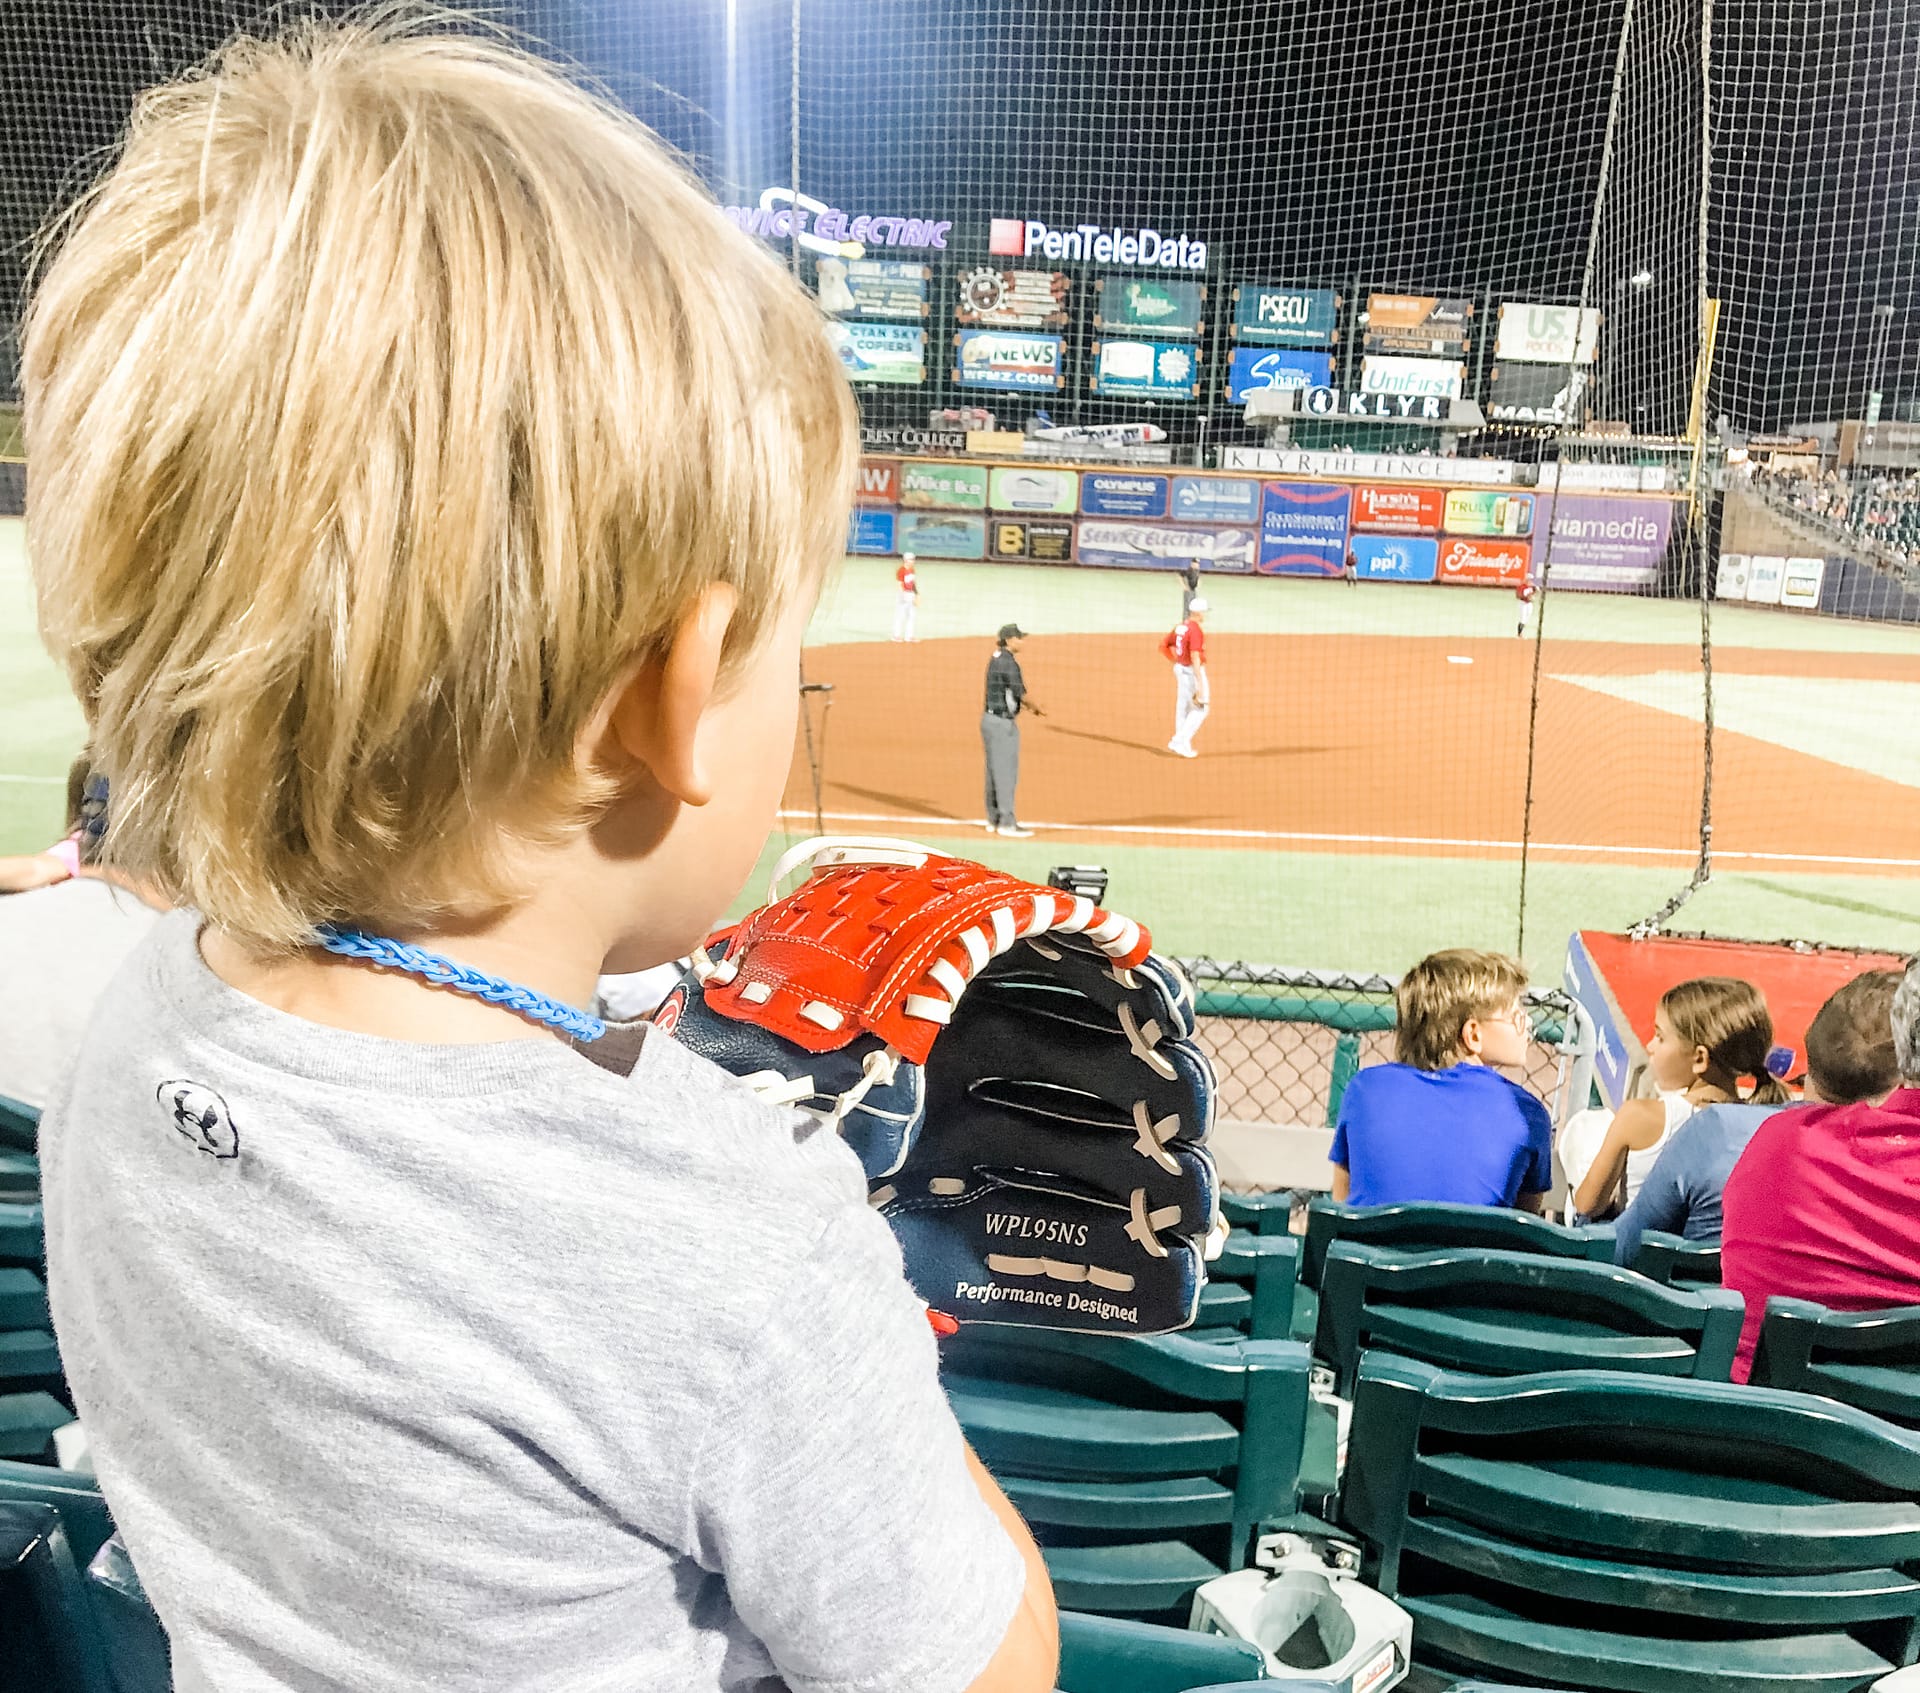 Boy watching a baseball game with his back to camera